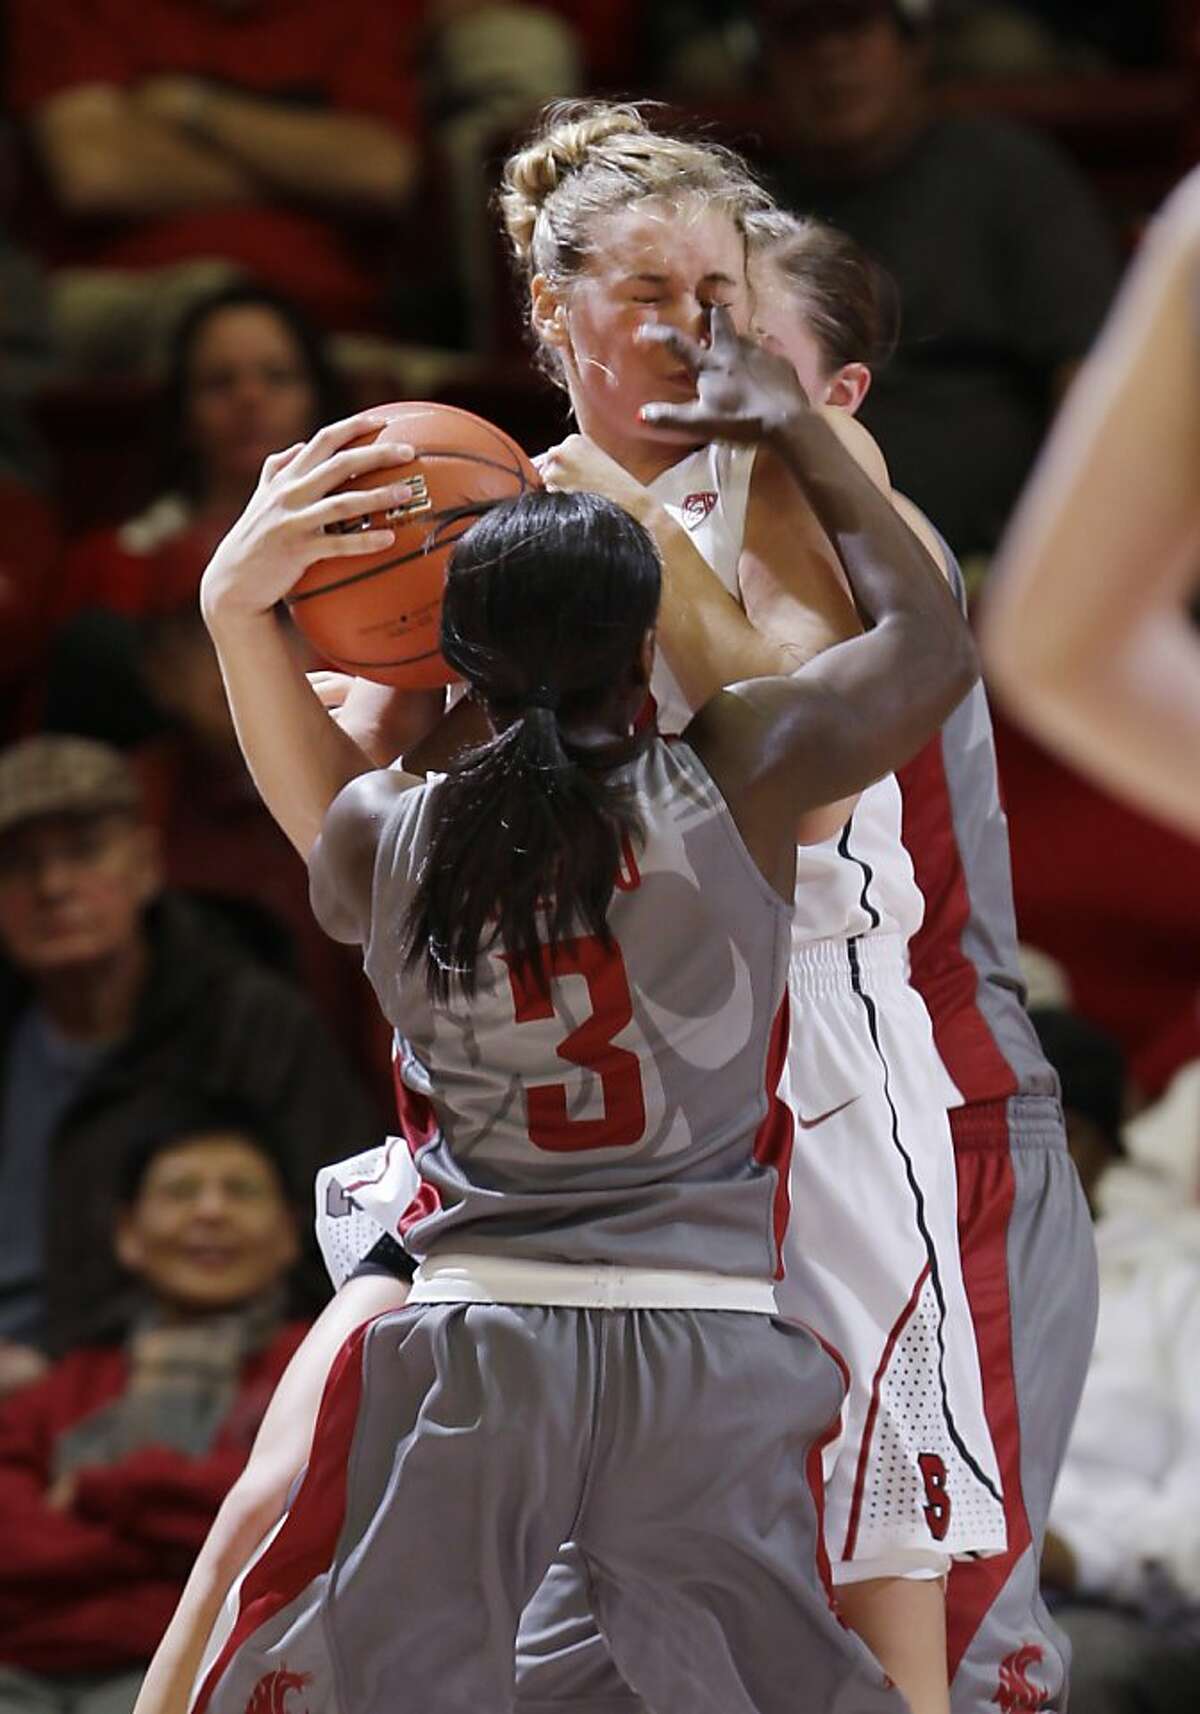 Stanford forward Joslyn Tinkle, top, is fouled by Washington State guard Rosetta Adzasu (3) in the first half of an NCAA college basketball game in Stanford, Calif., Thursday, Jan. 19, 2012. (AP Photo/Paul Sakuma)